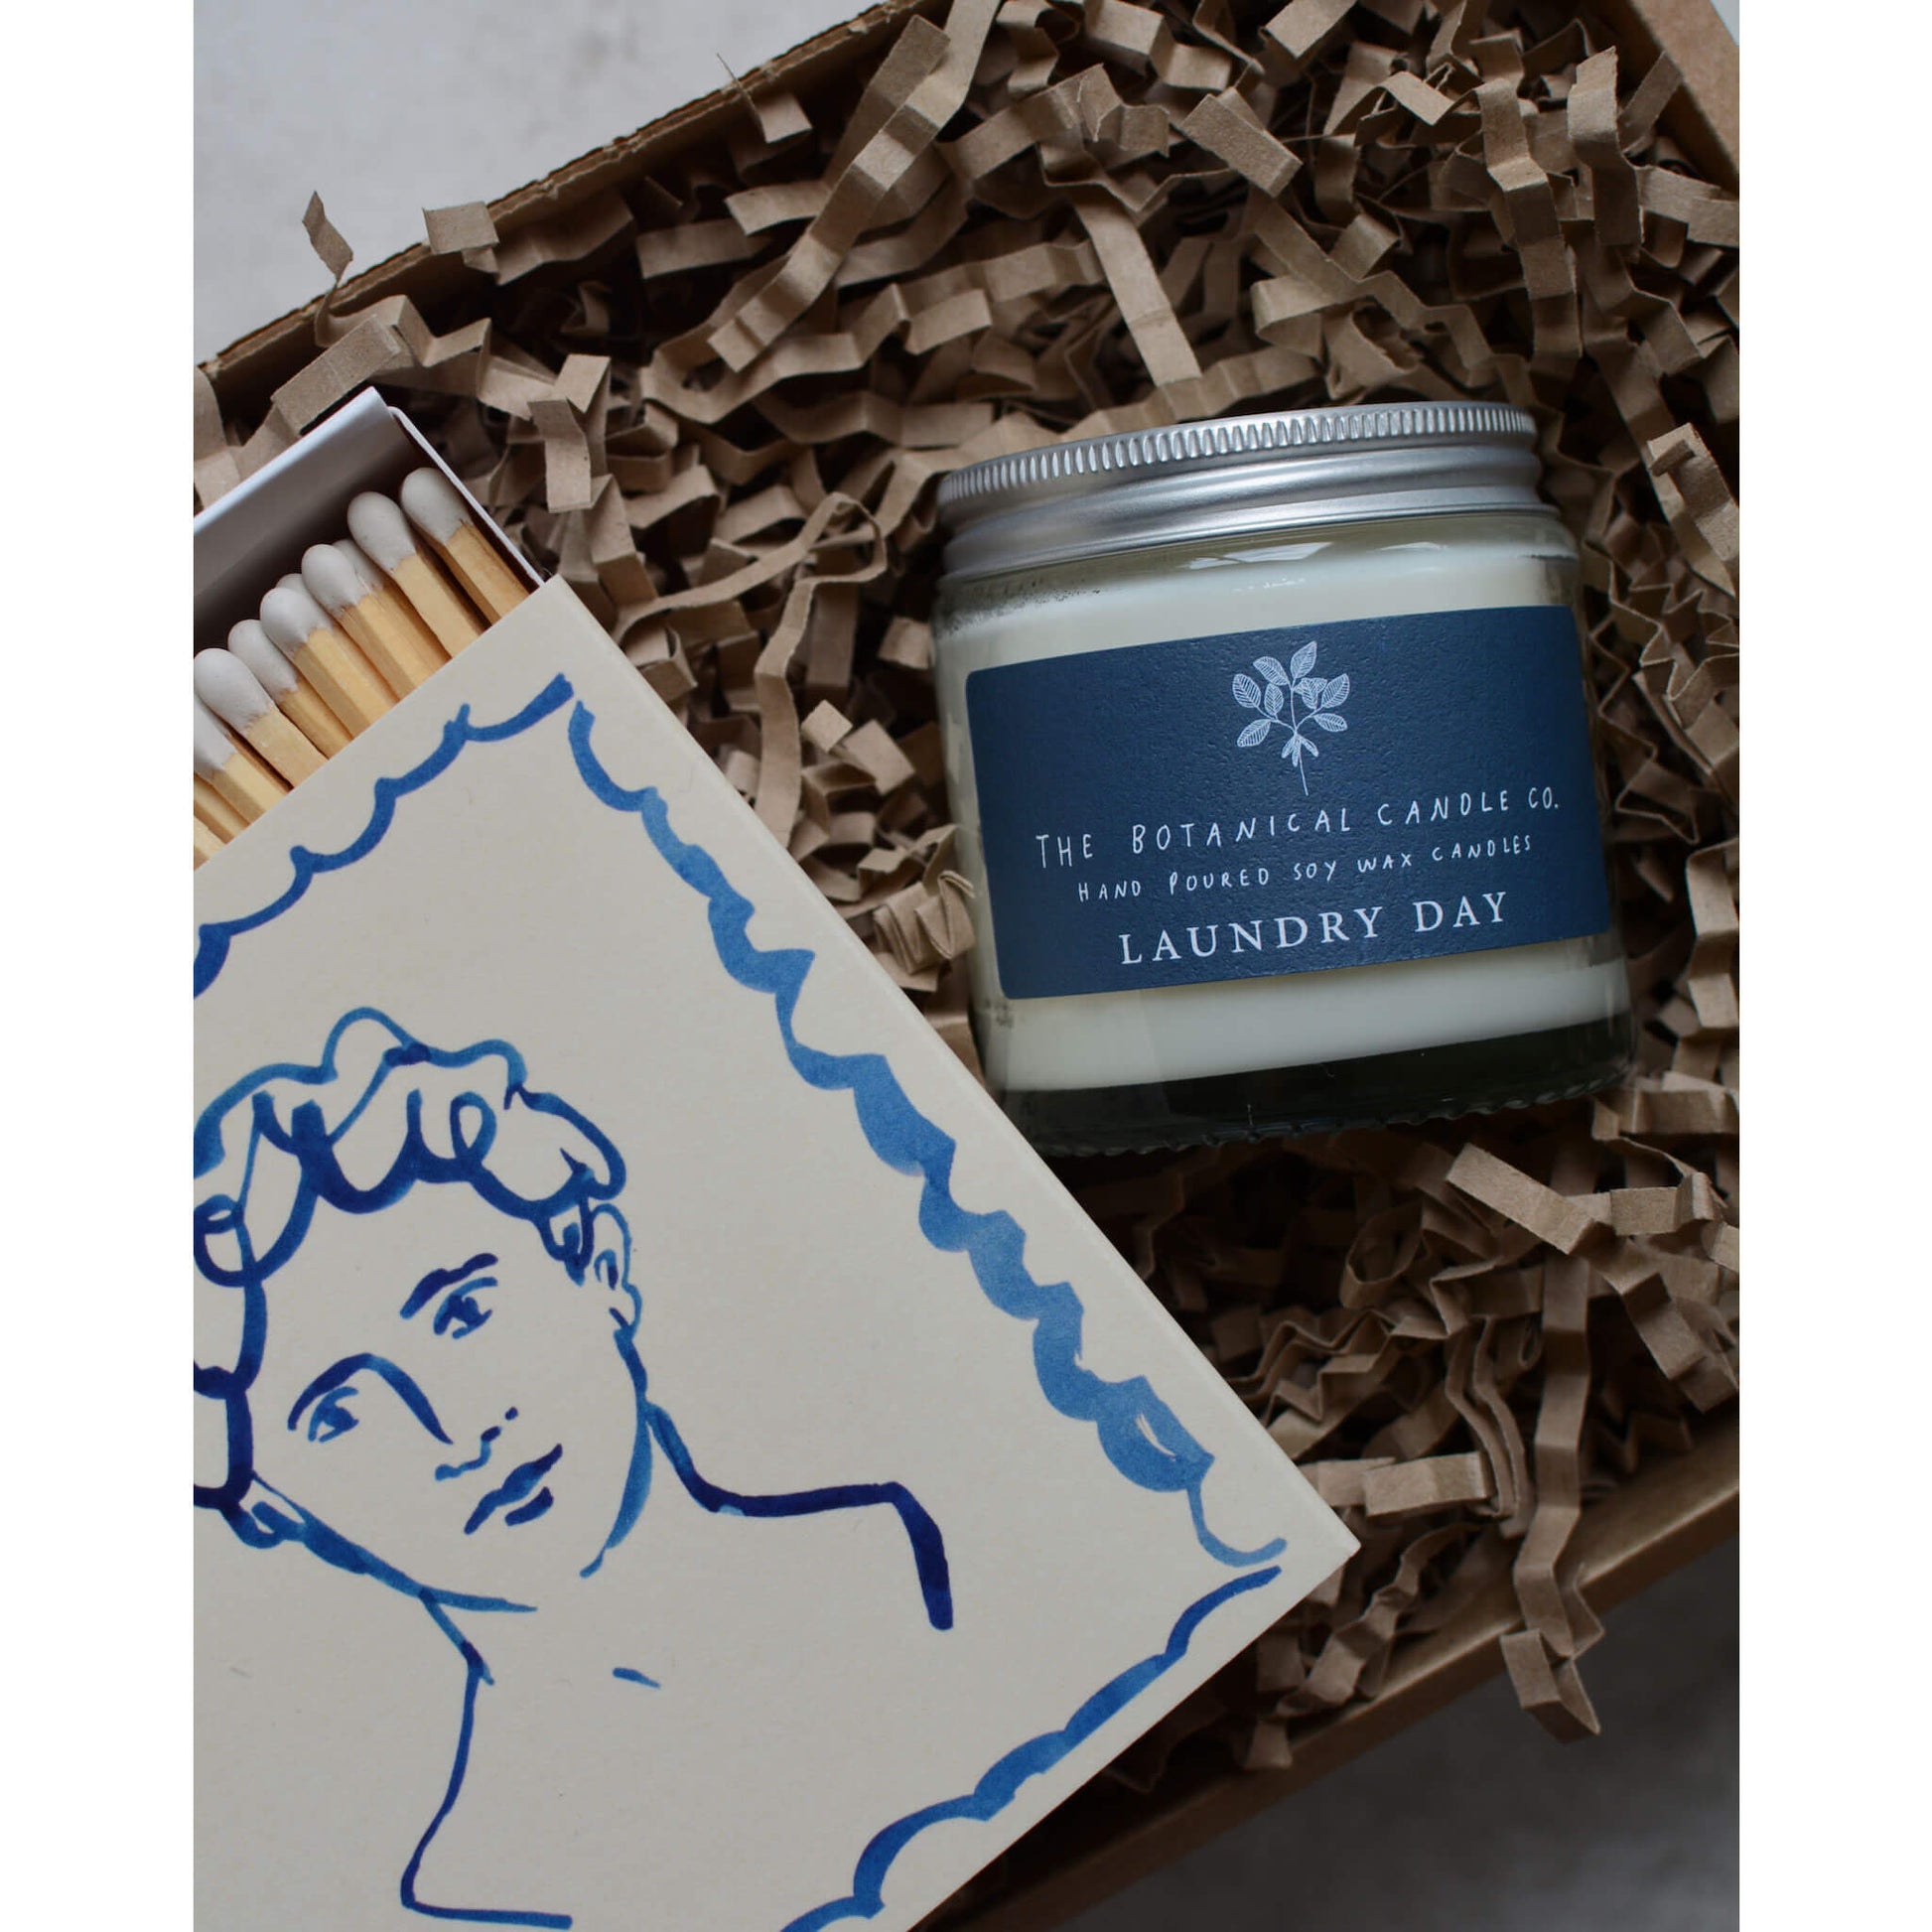 Laundry Day scented candle by The Botanical Candle Co.